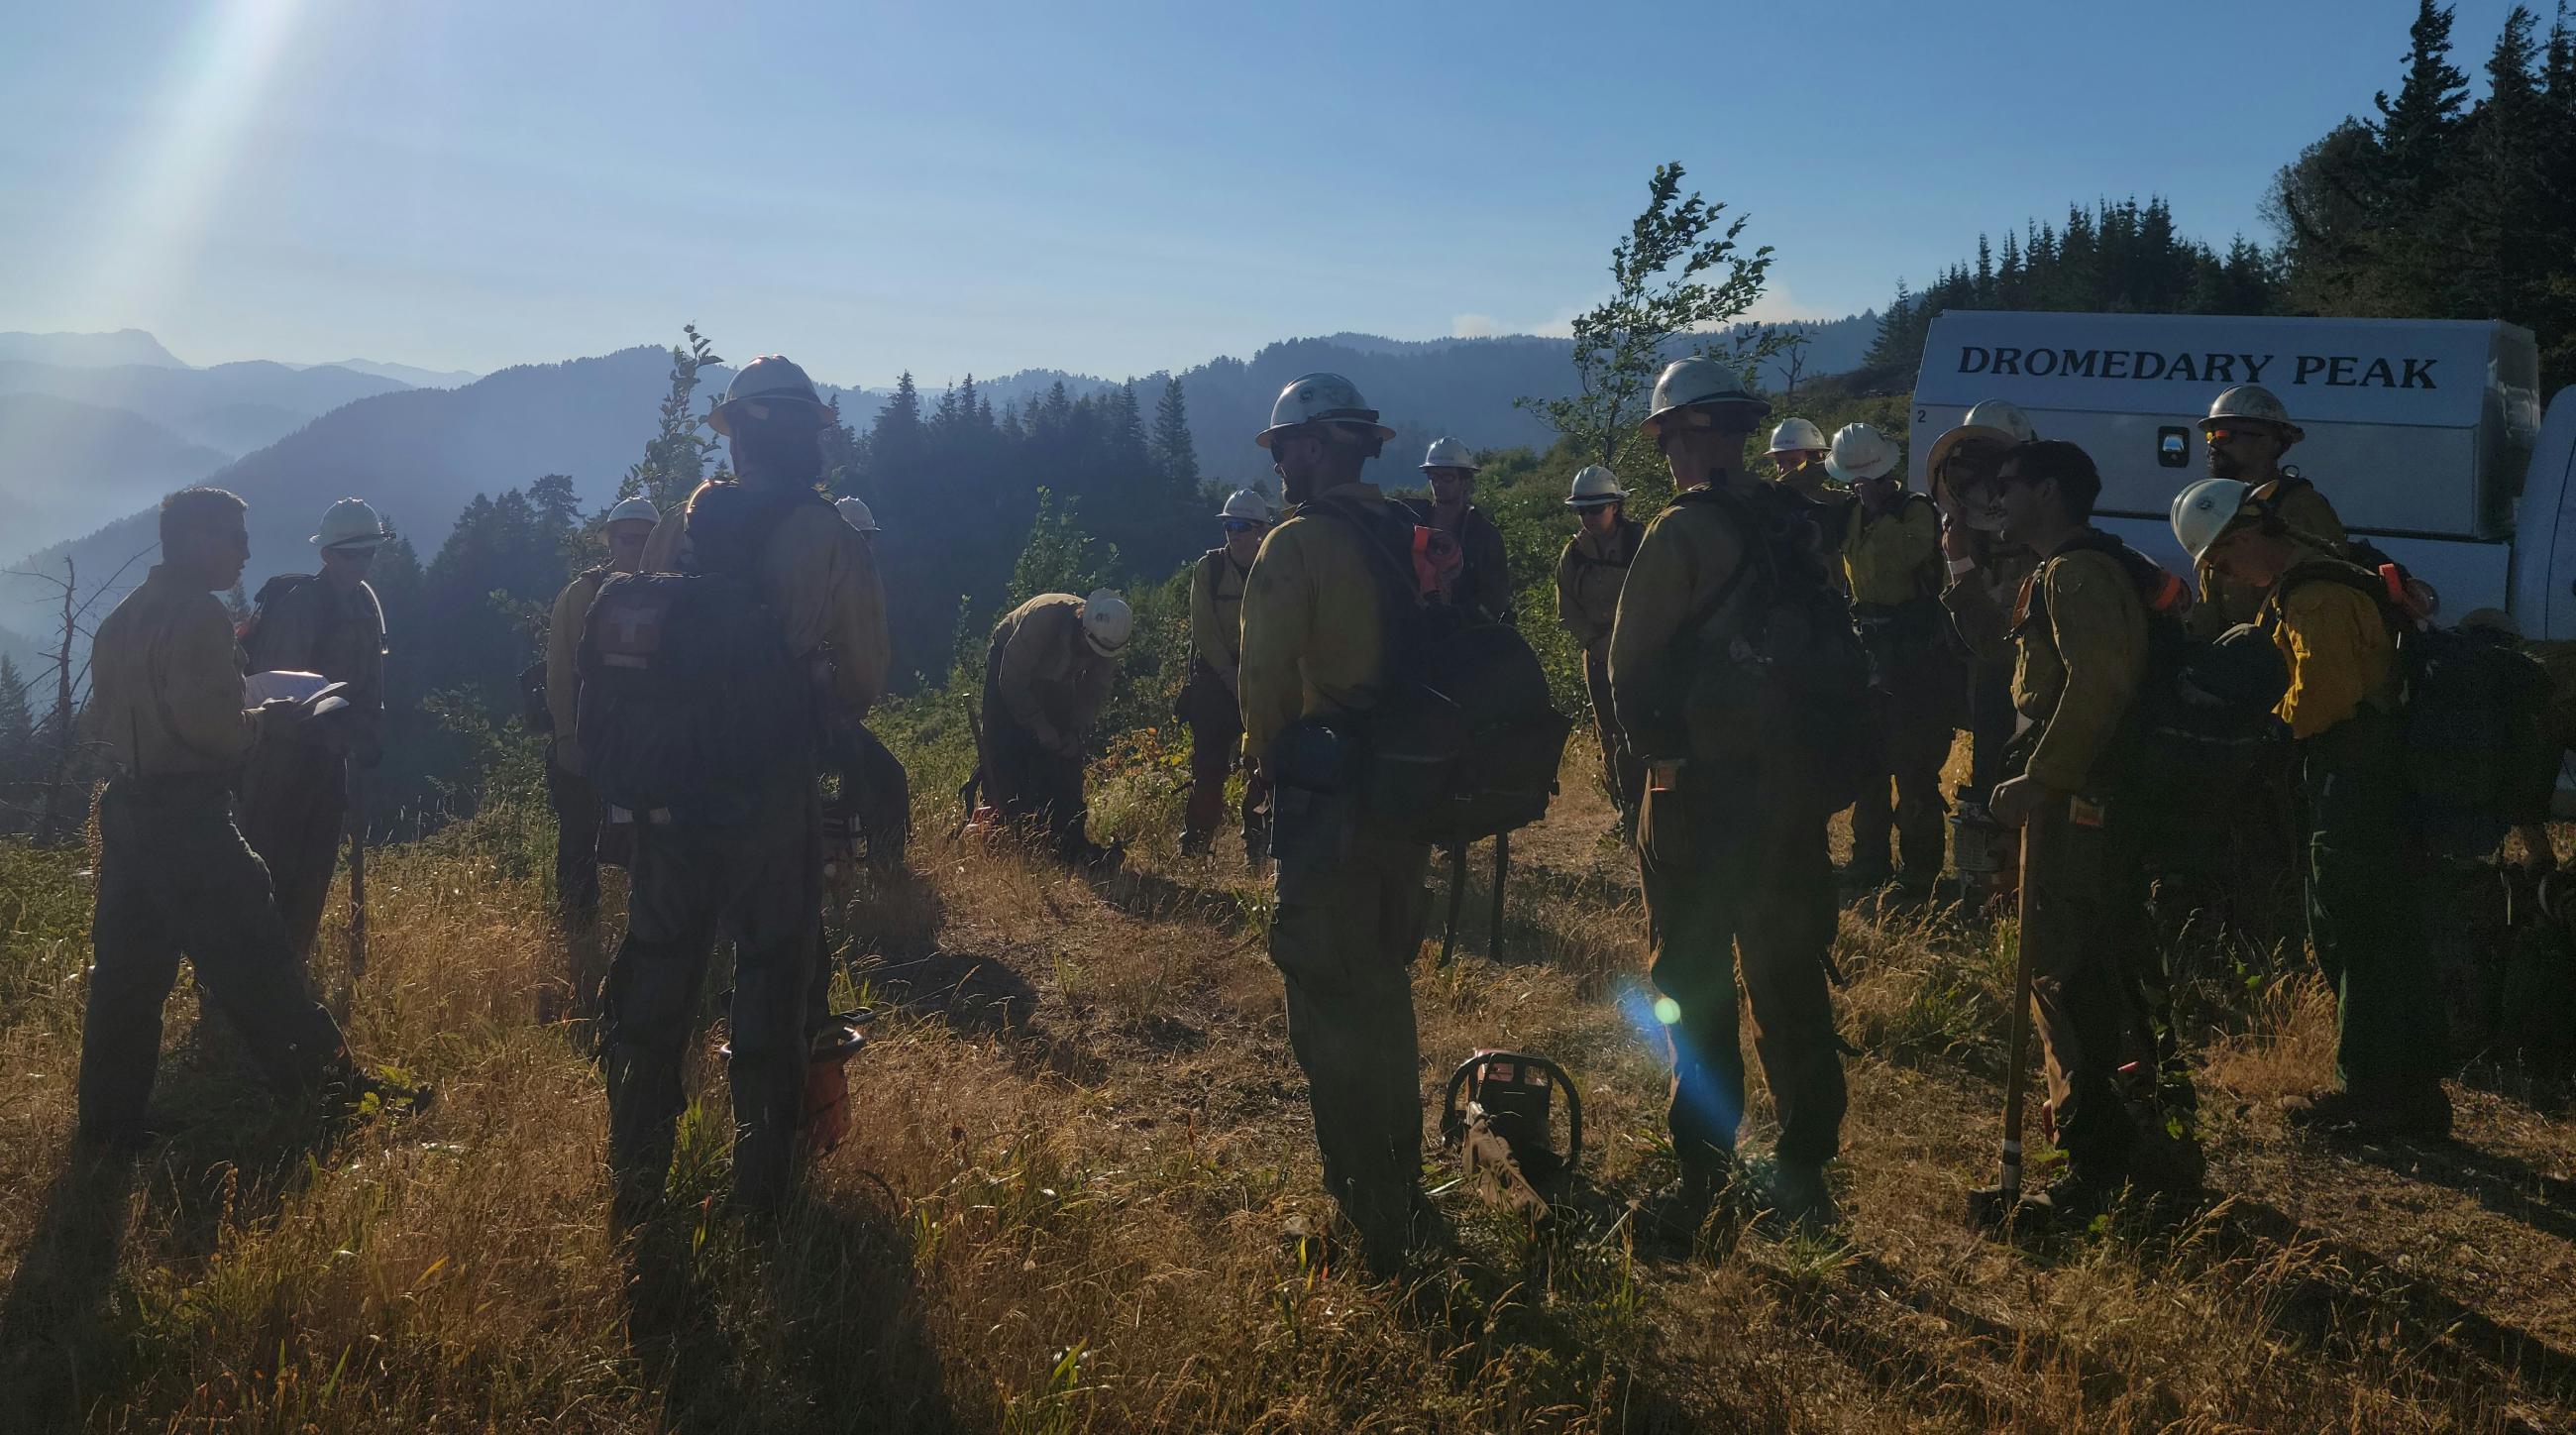 17 wildland firefighters stand in a circle next to a fire vehicle with the name Dromedary Peak on the side. Firefighters are wearing green Nomex pants and yellow shirts. Some are wearing hard hats and a chainsaw is on the ground.